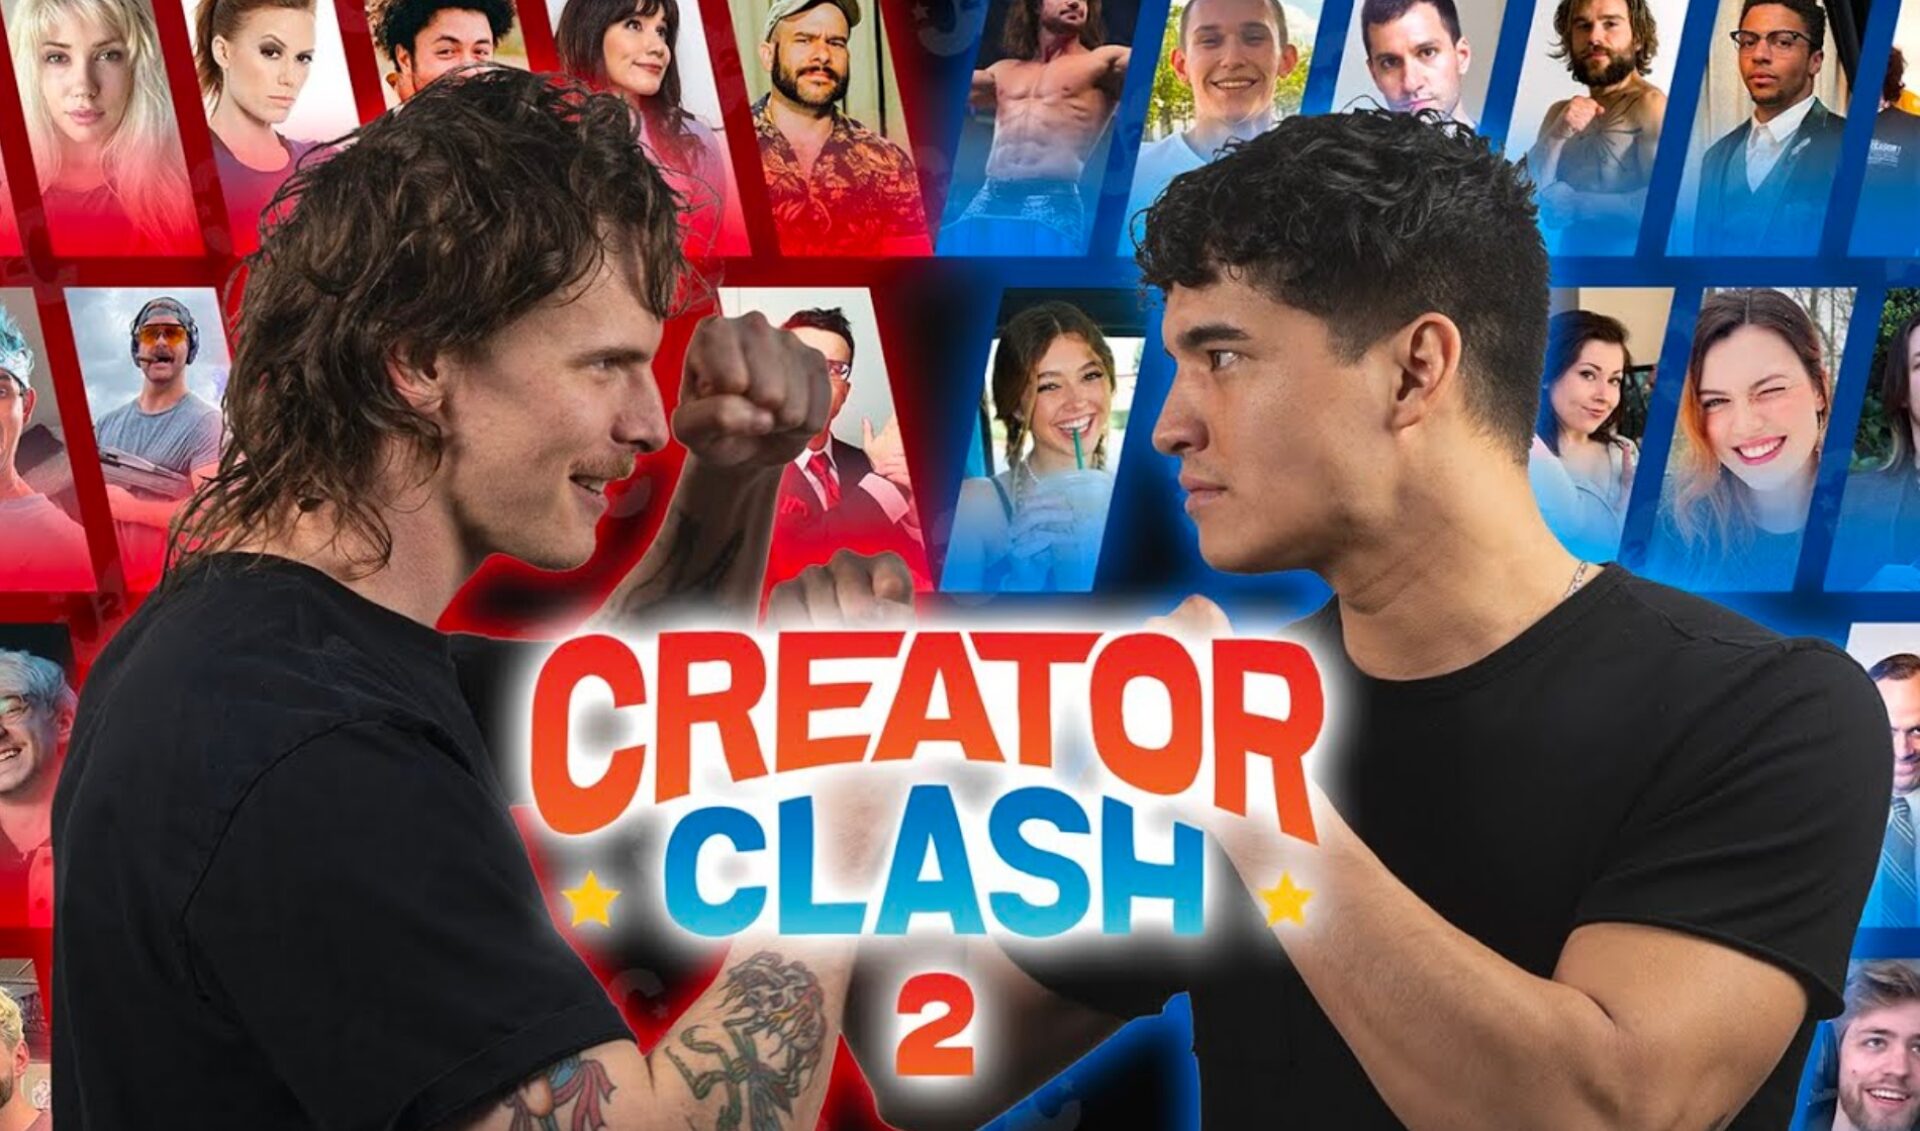 iDubbbz is bringing back the Creator Clash and facing a new challenger